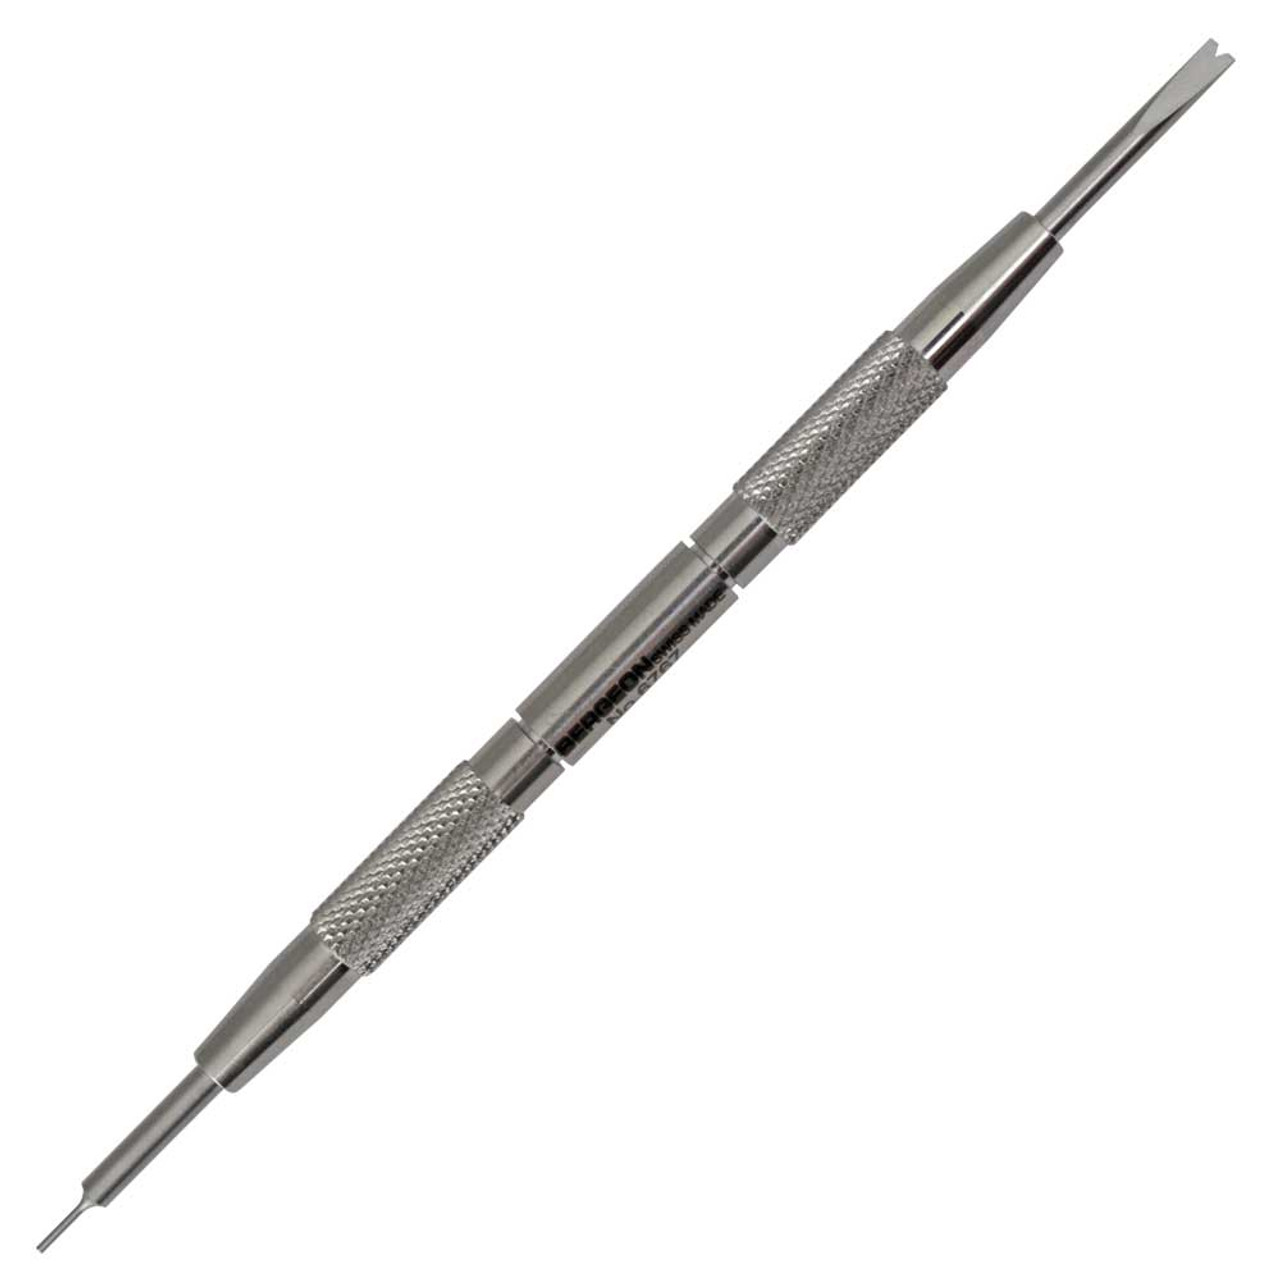 Horizontal Bergeon tool for removing and inserting watch strap pins